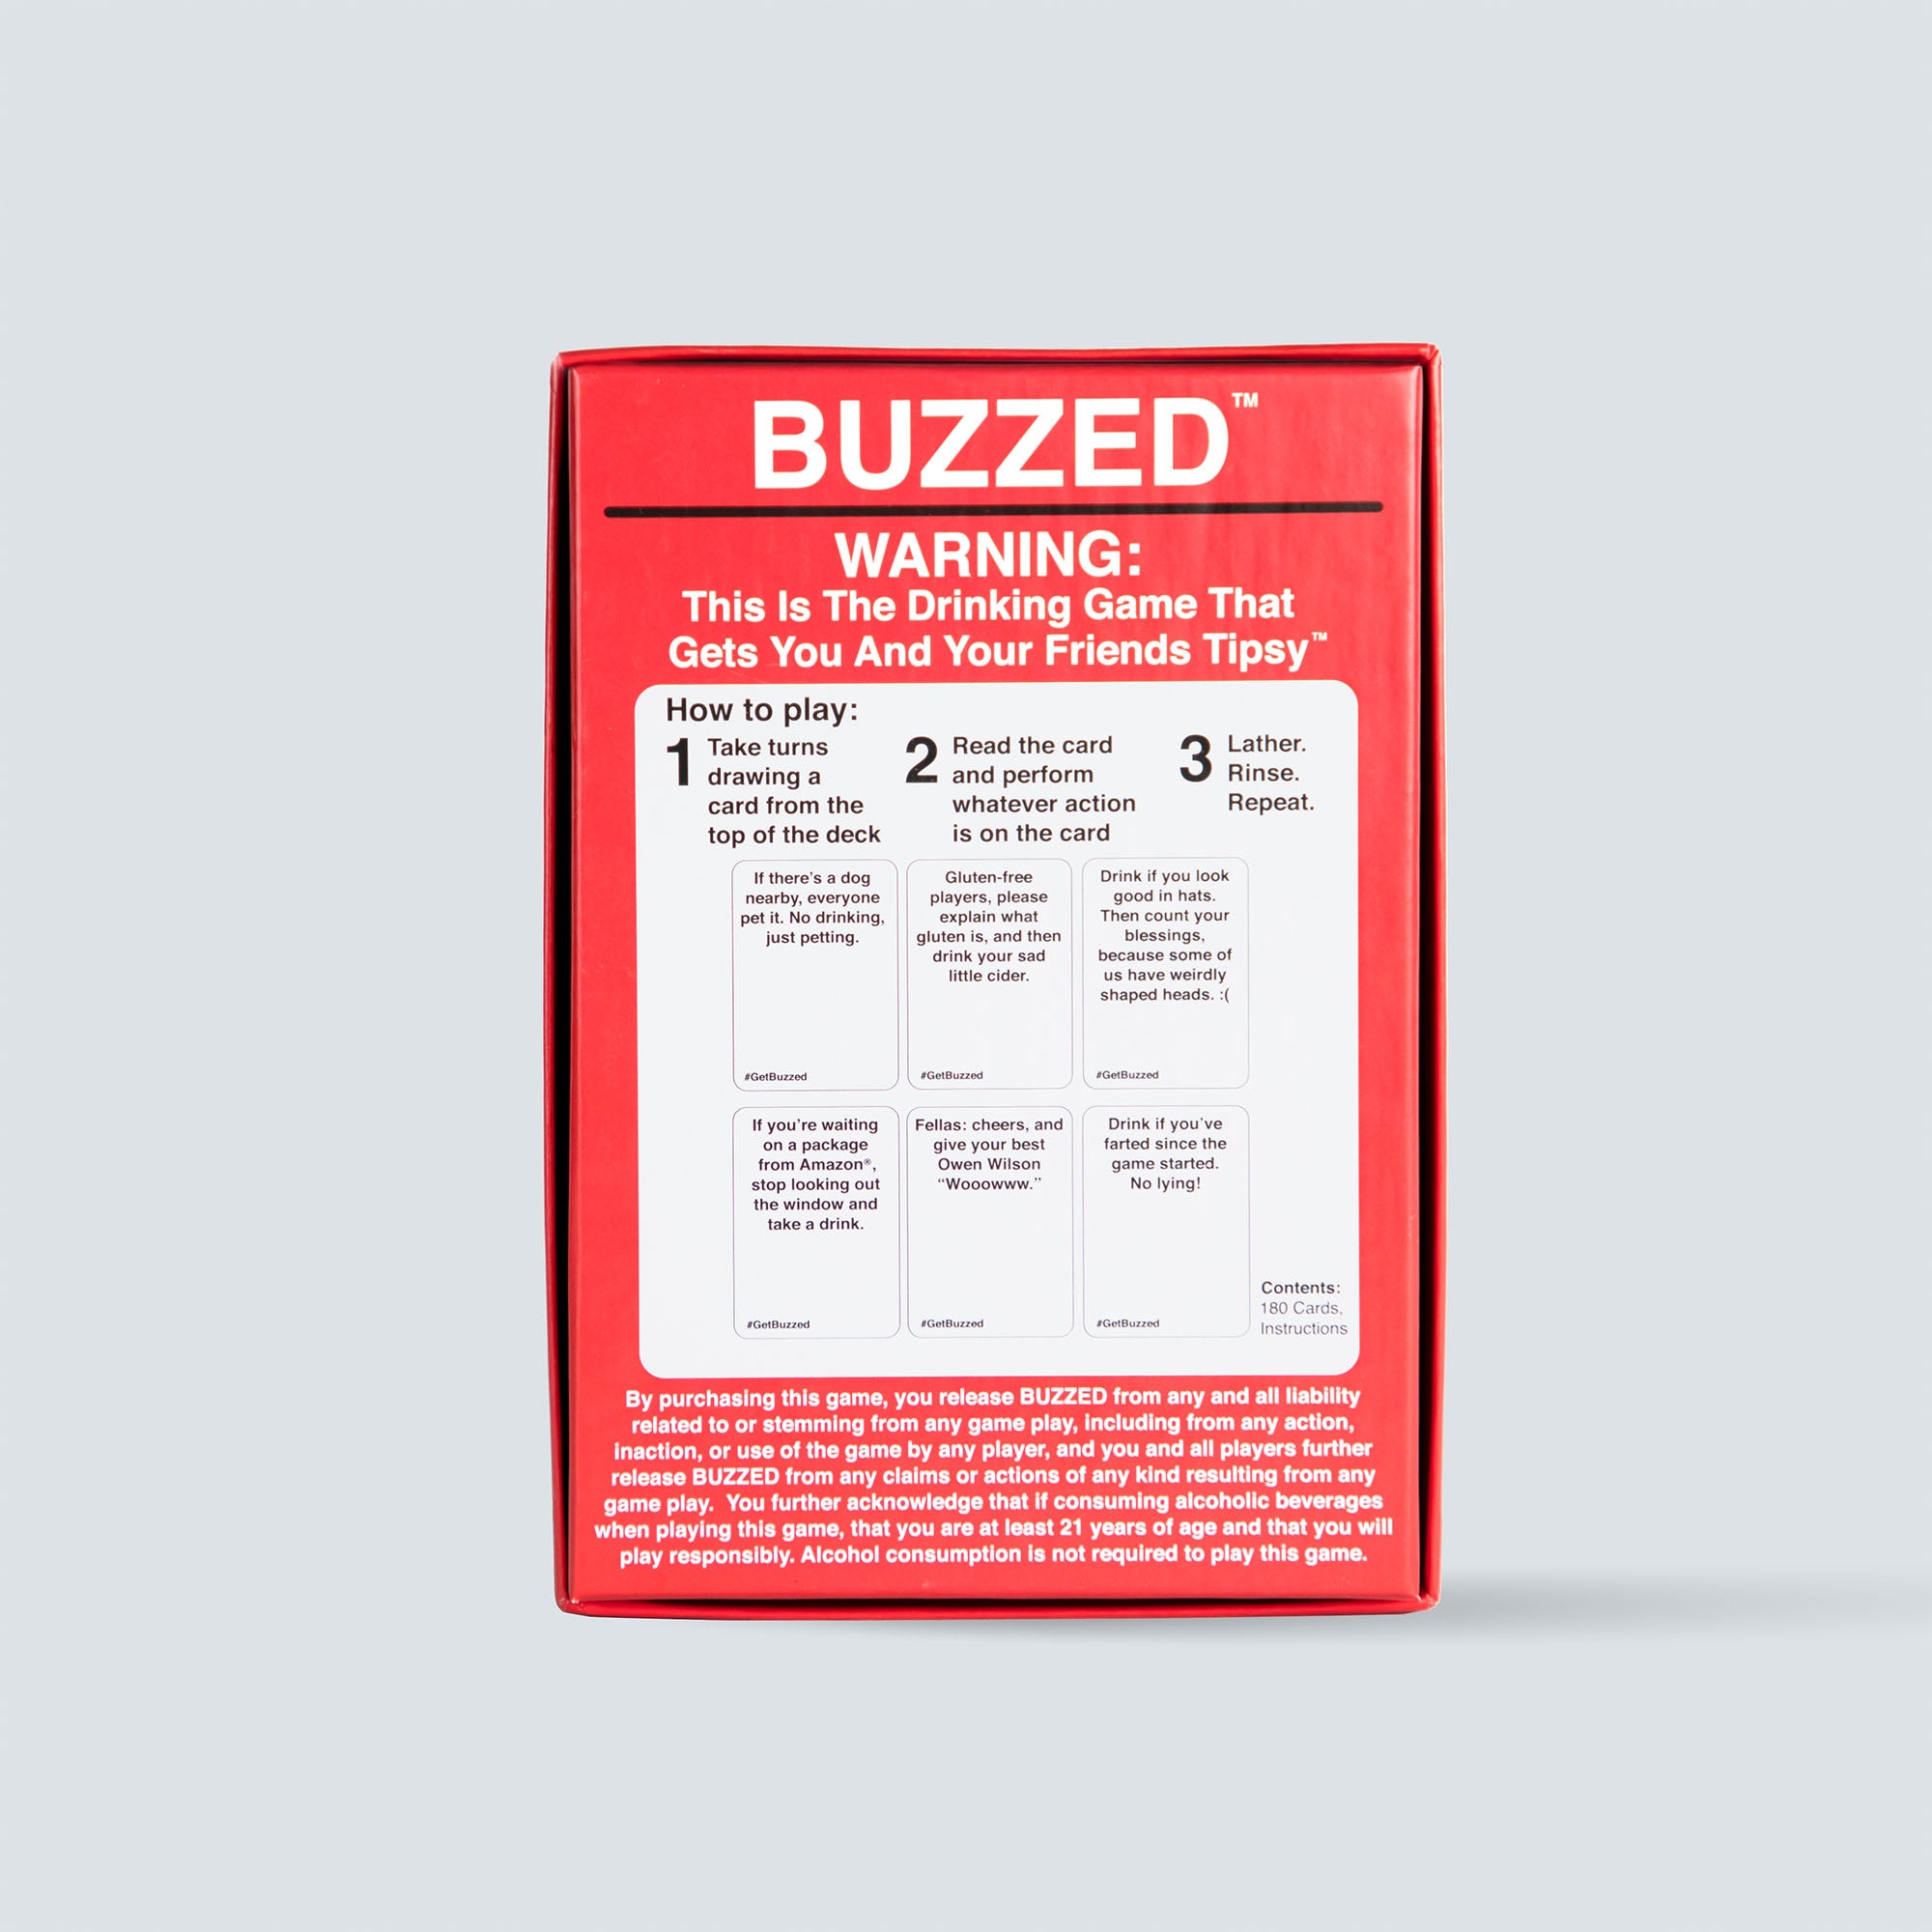 buzzed-expansion-pack-1-game-box-and-game-play-04-what-do-you-meme-by-relatable